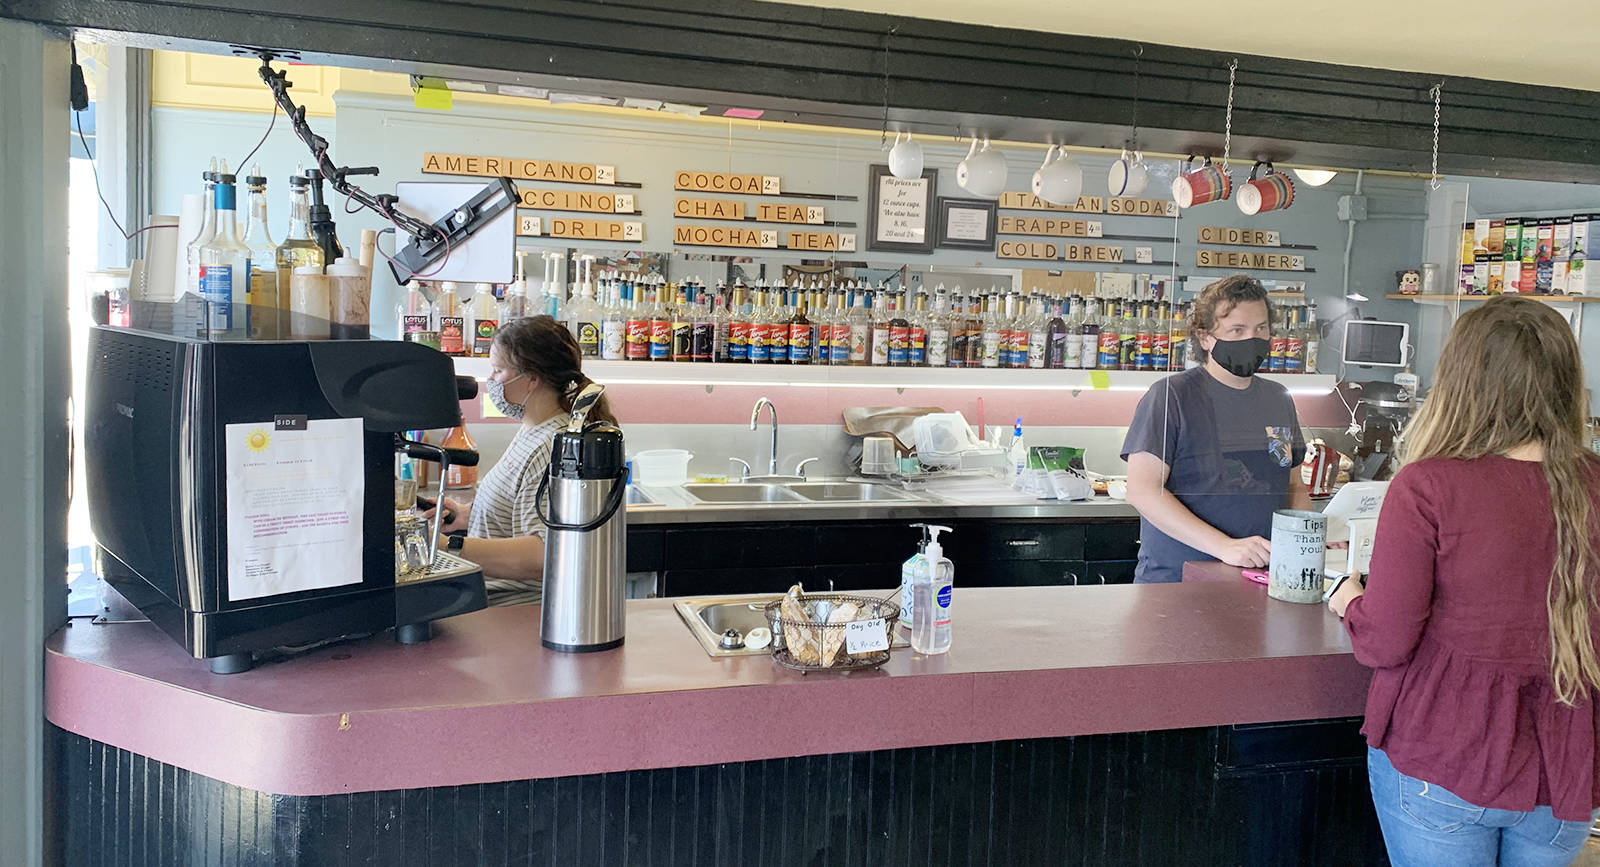 ‘We get a lot of the locals who come in for their regular cup of coffee, and love that we can get it ready for them without asking,’ says All Wrapped Up owner Judy Mawhorter.